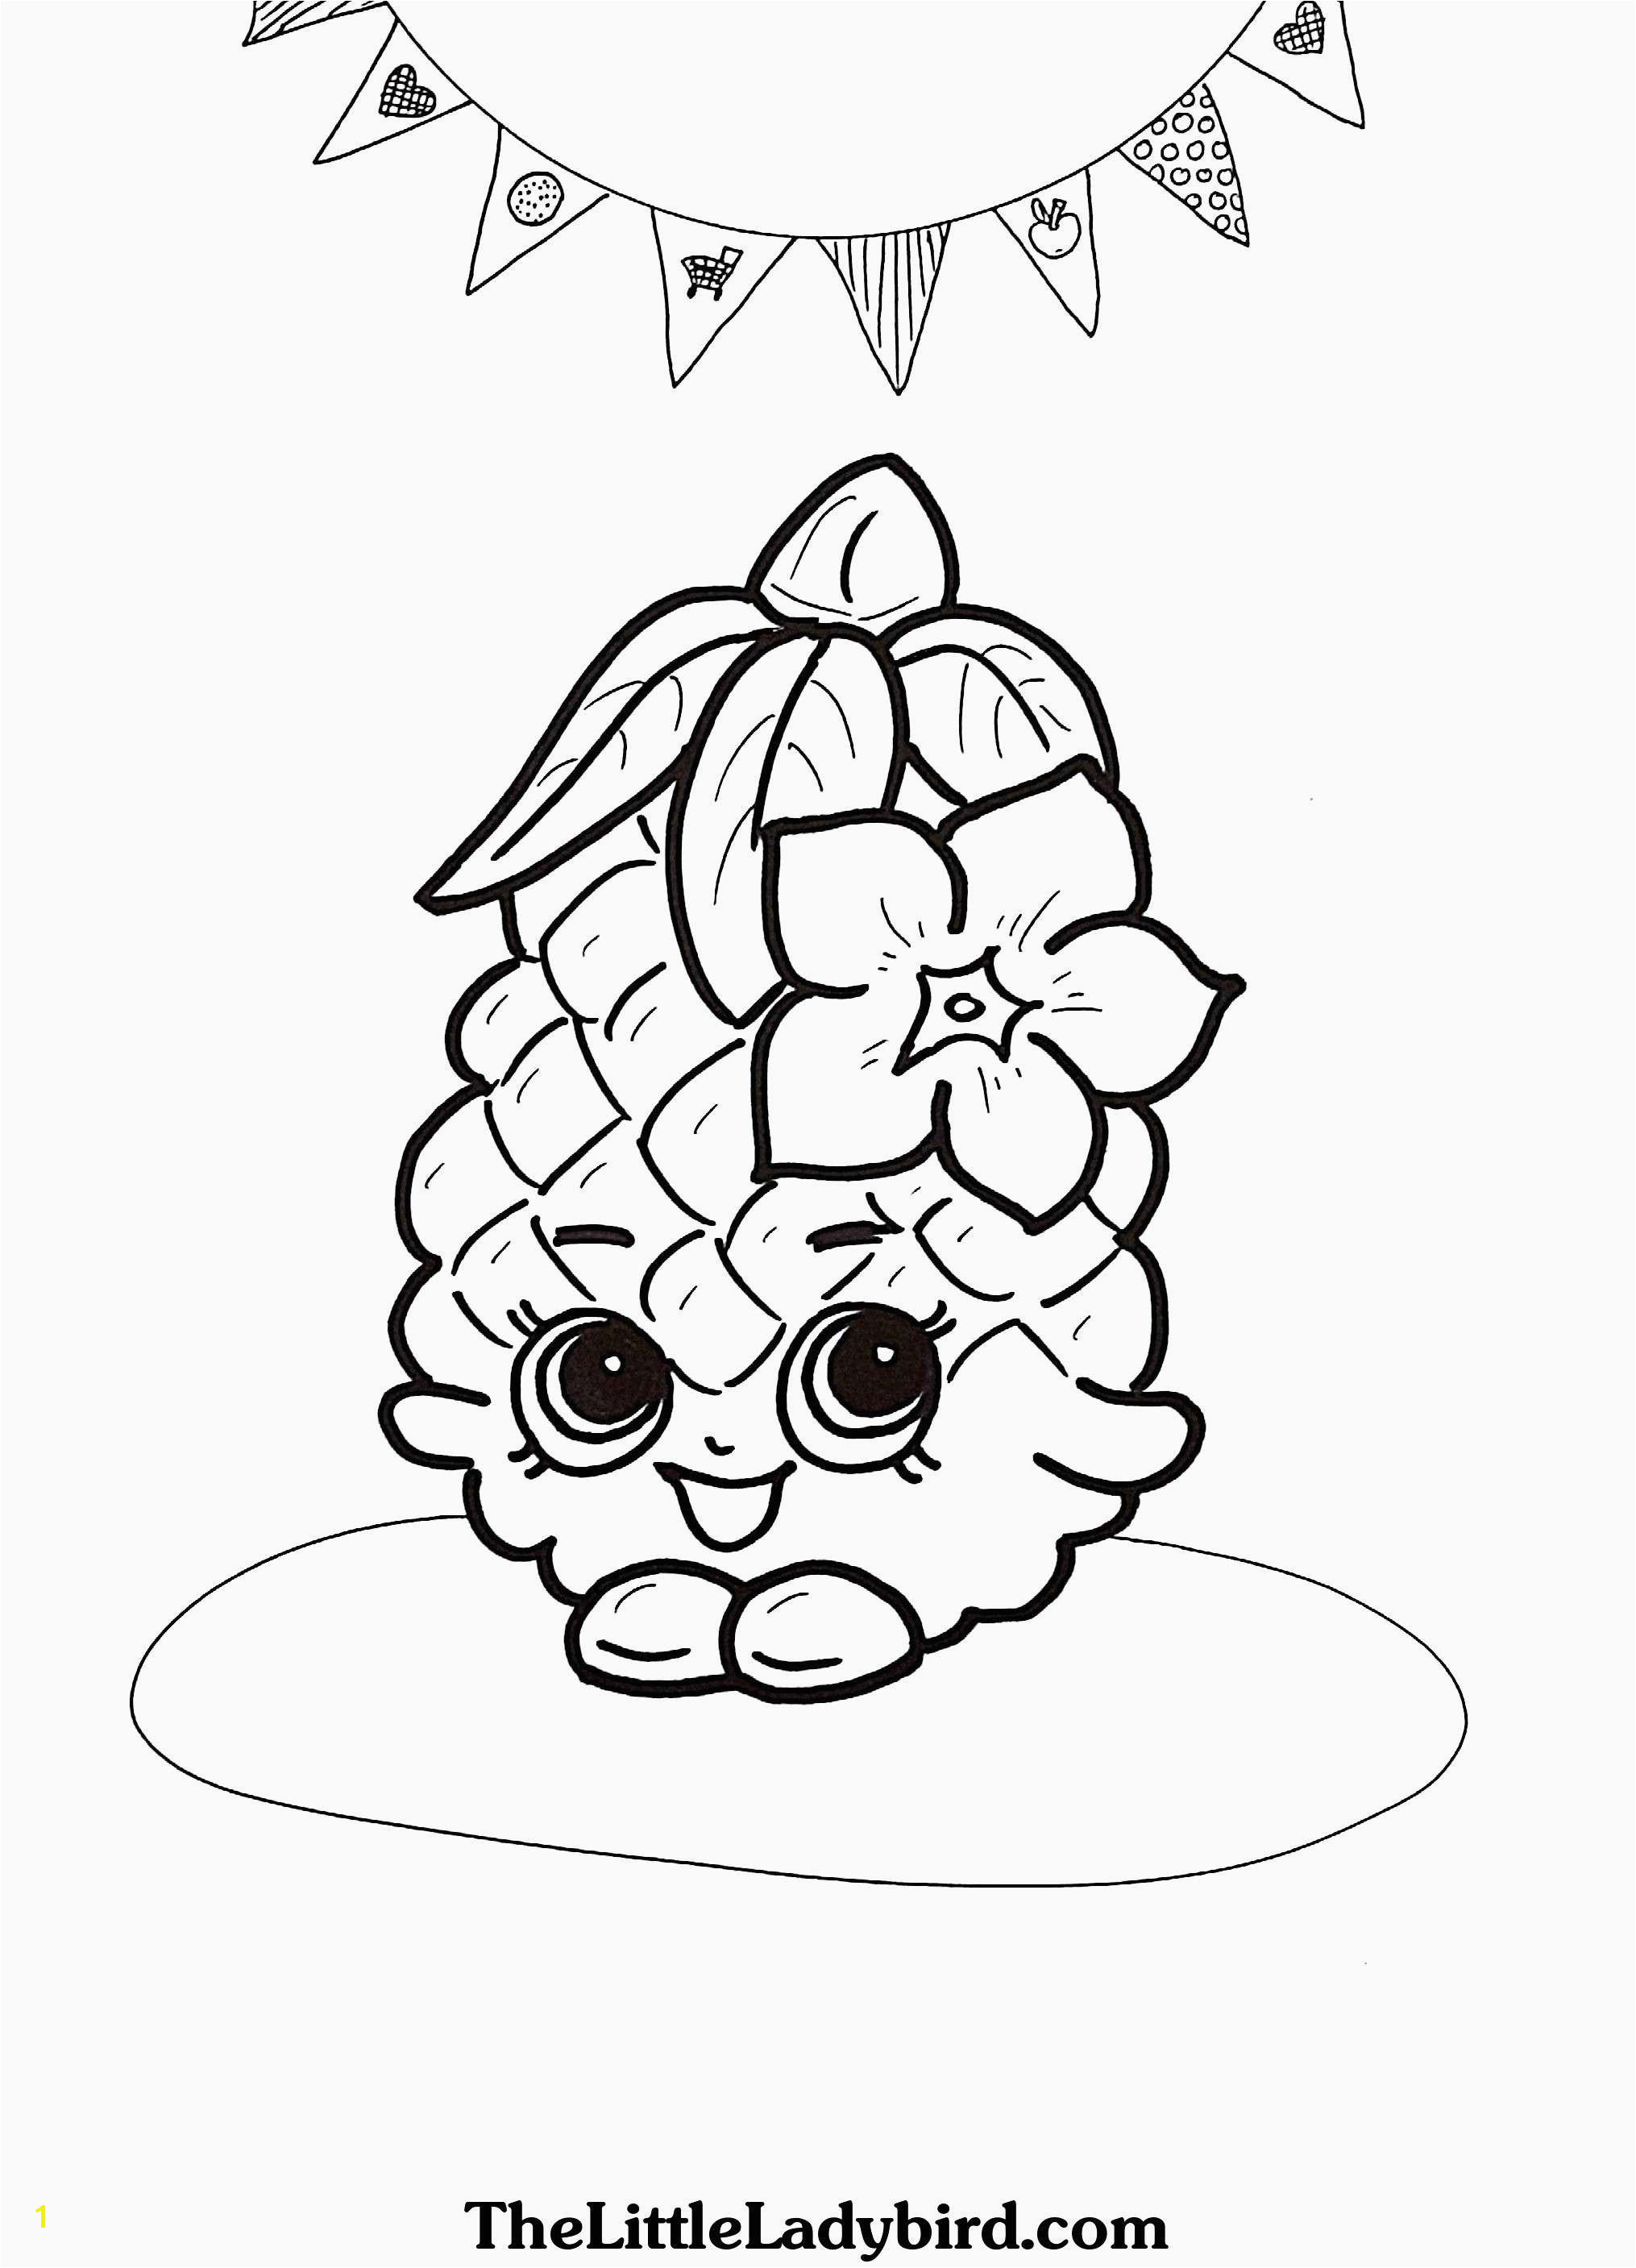 Tiana Coloring Pages Car Coloring Pages New Cool Coloring Page Unique Witch Coloring Pages New